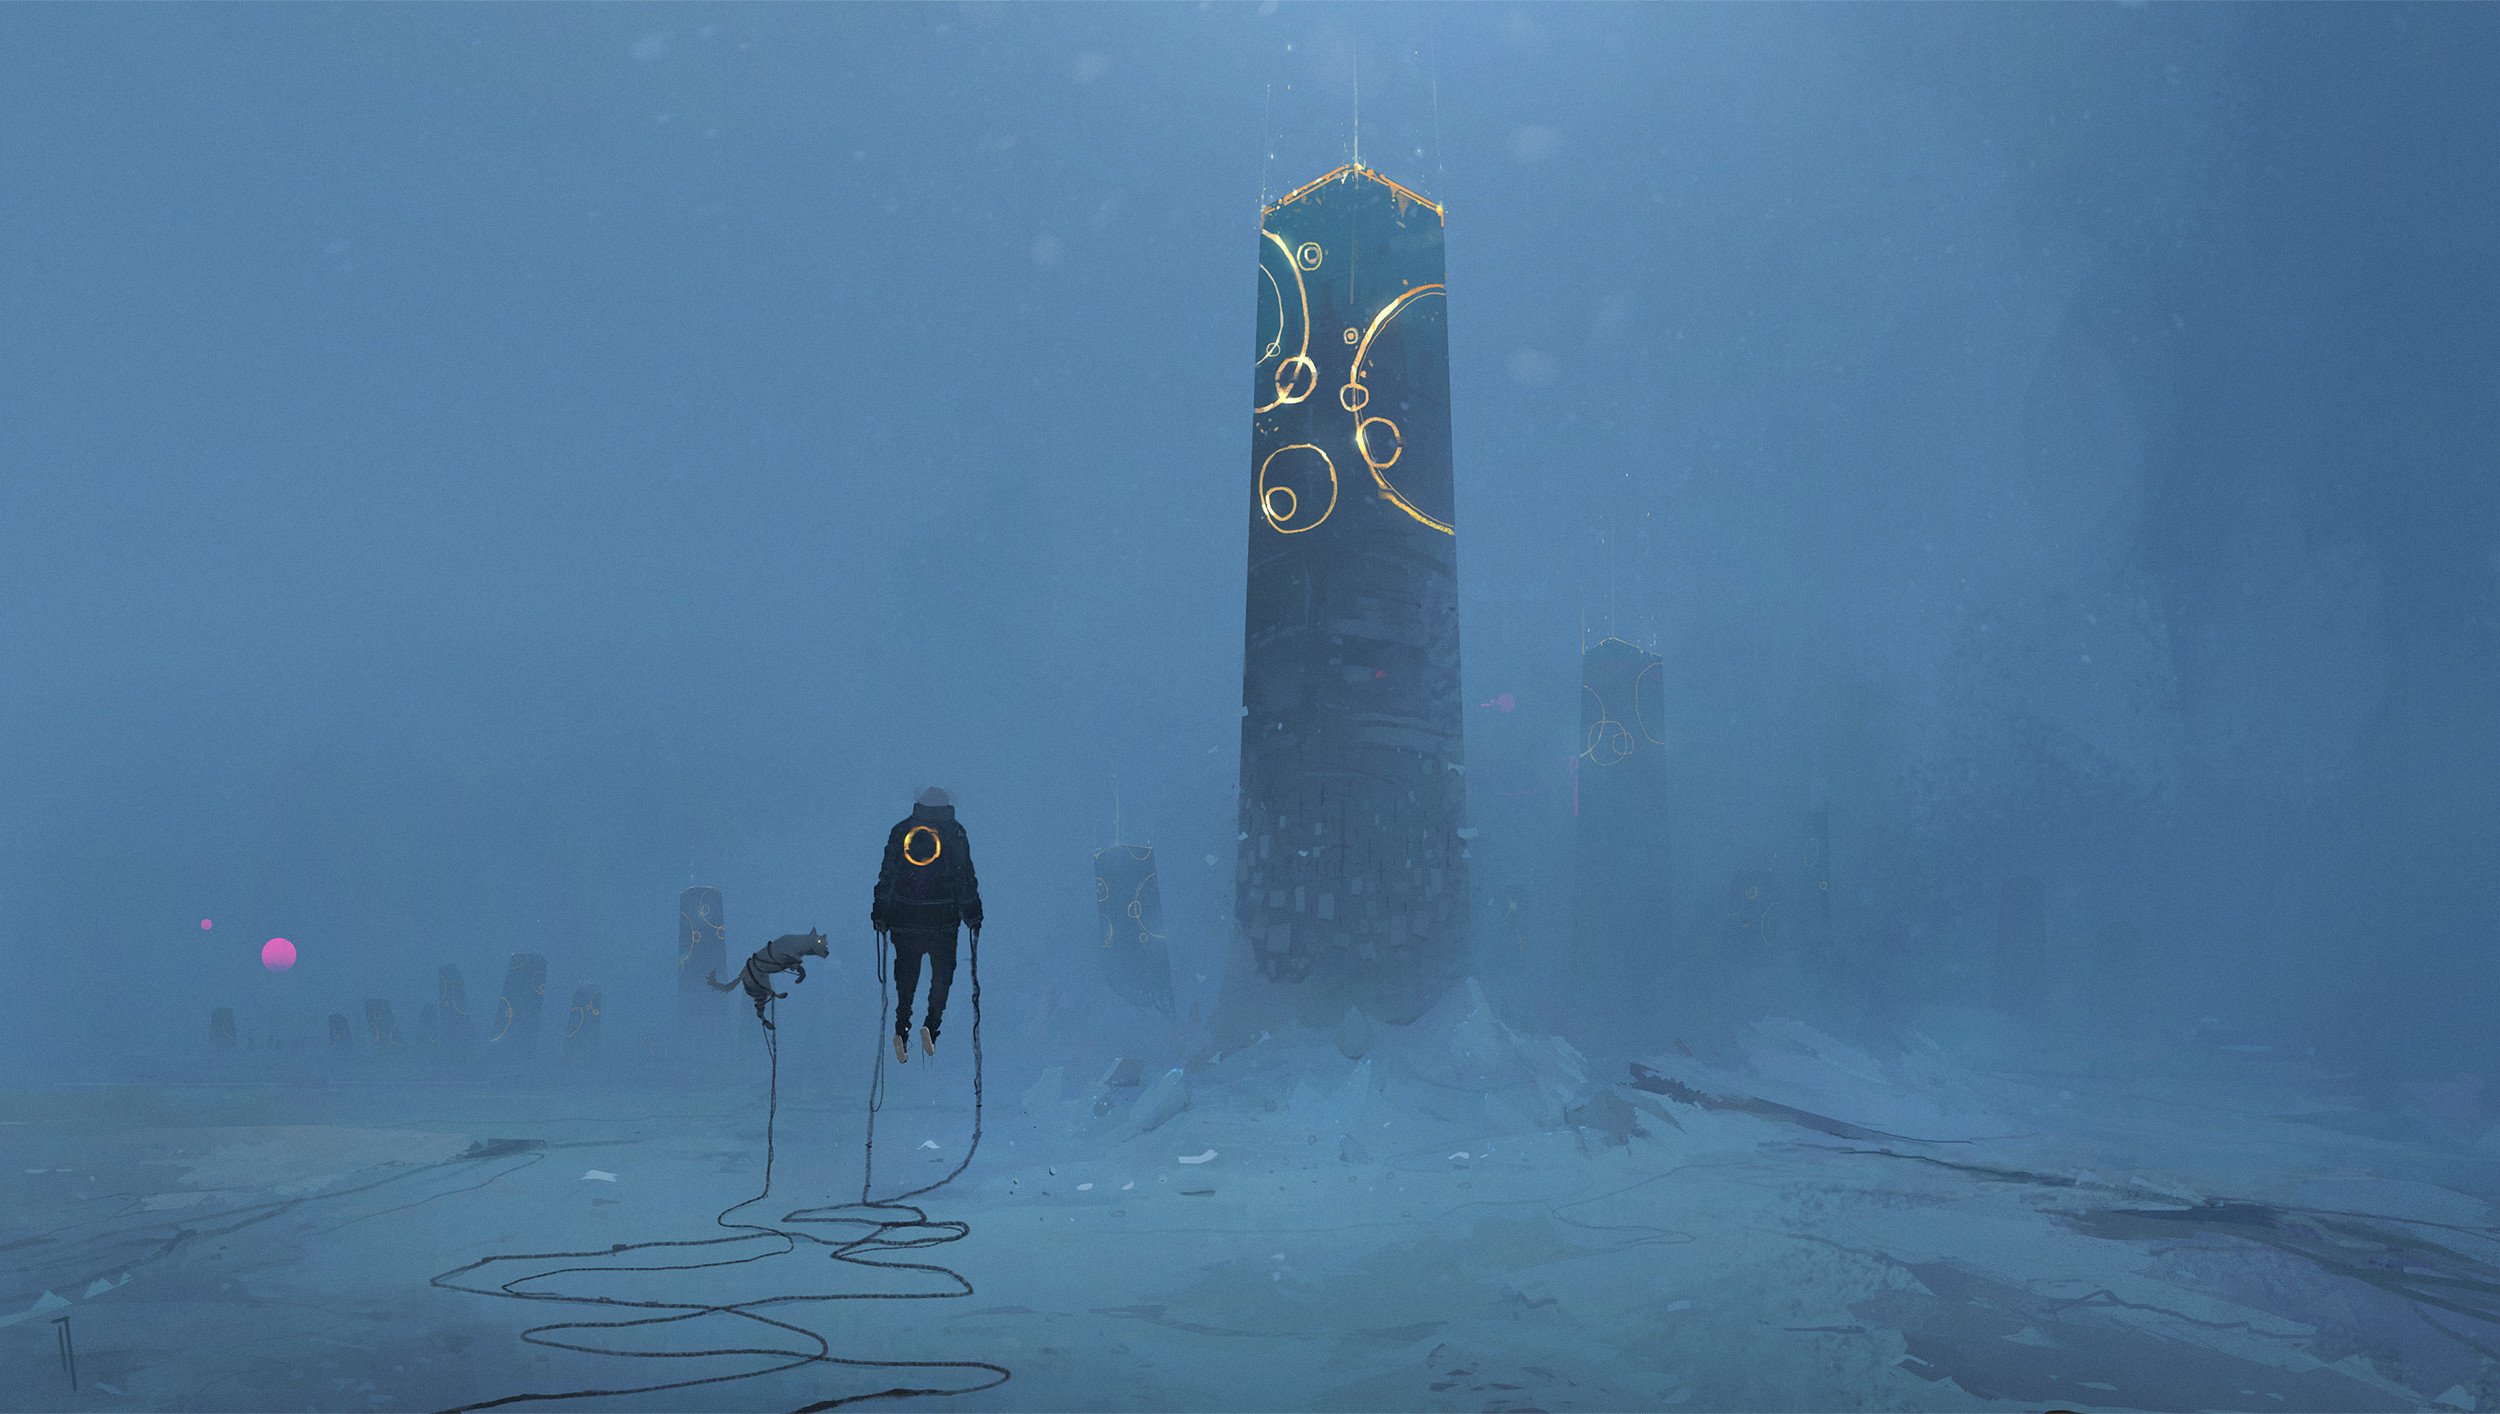 Cyberpunk Science Fiction Environment Dog Snow Gravity Digital Art Cable Monolith Ismail Inceoglu 2500x1414